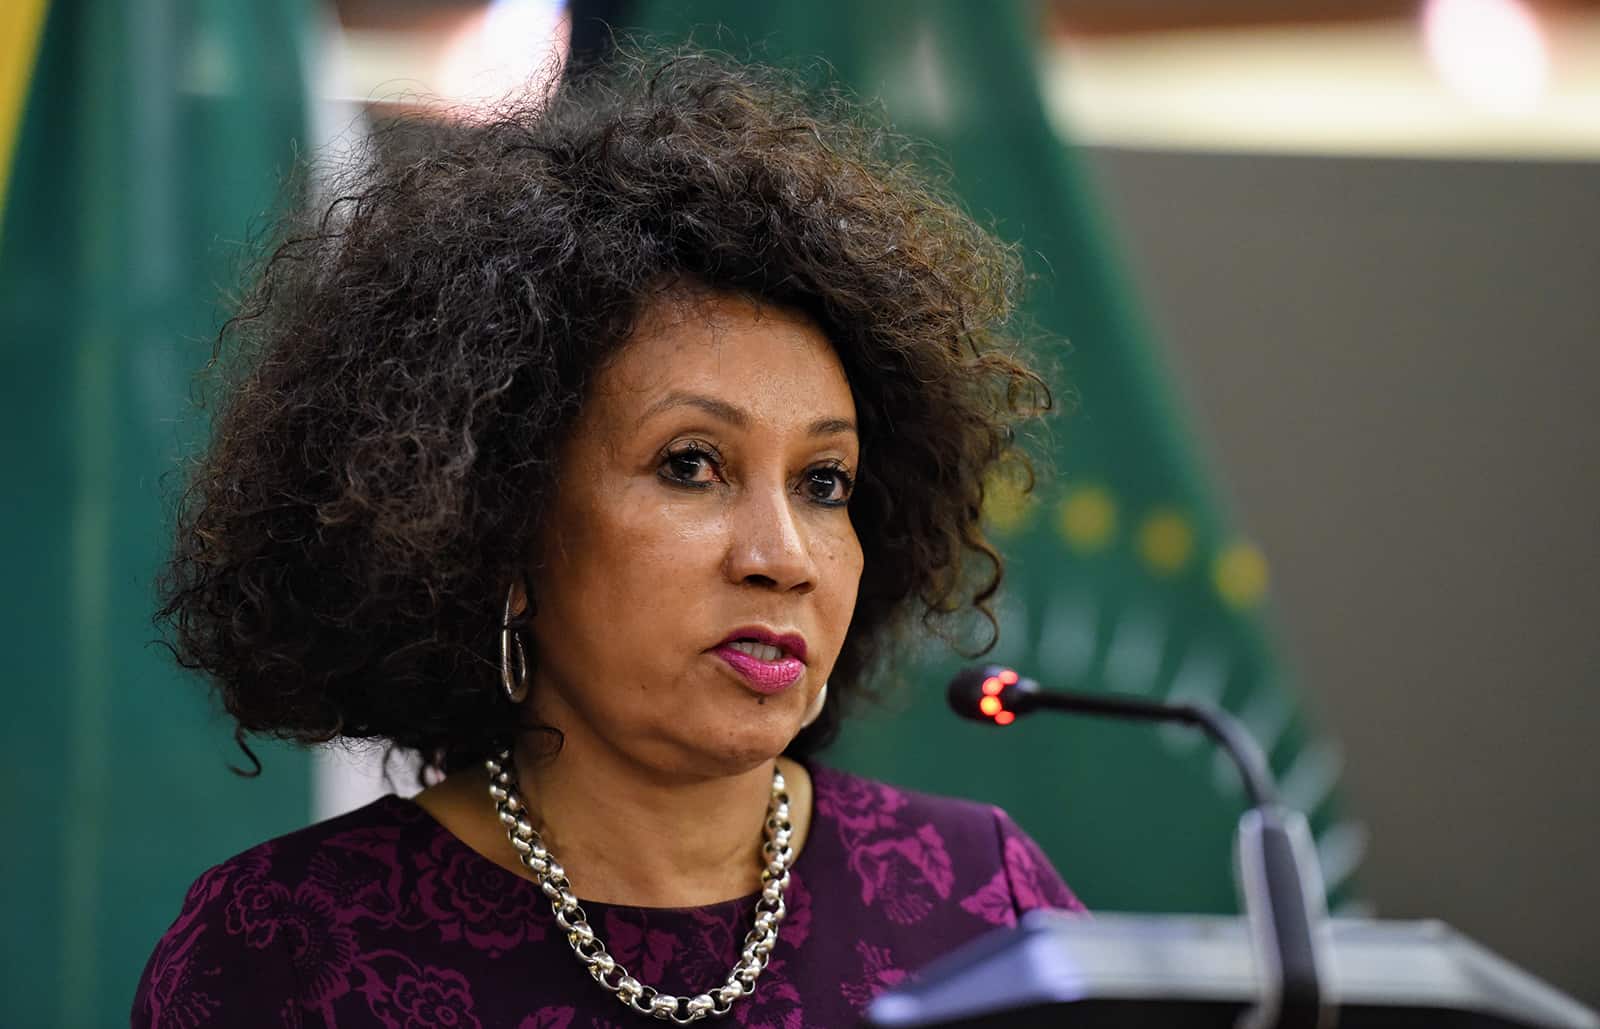 SA Minister Lindiwe Sisulu Defies President and Refuses To Apologise!